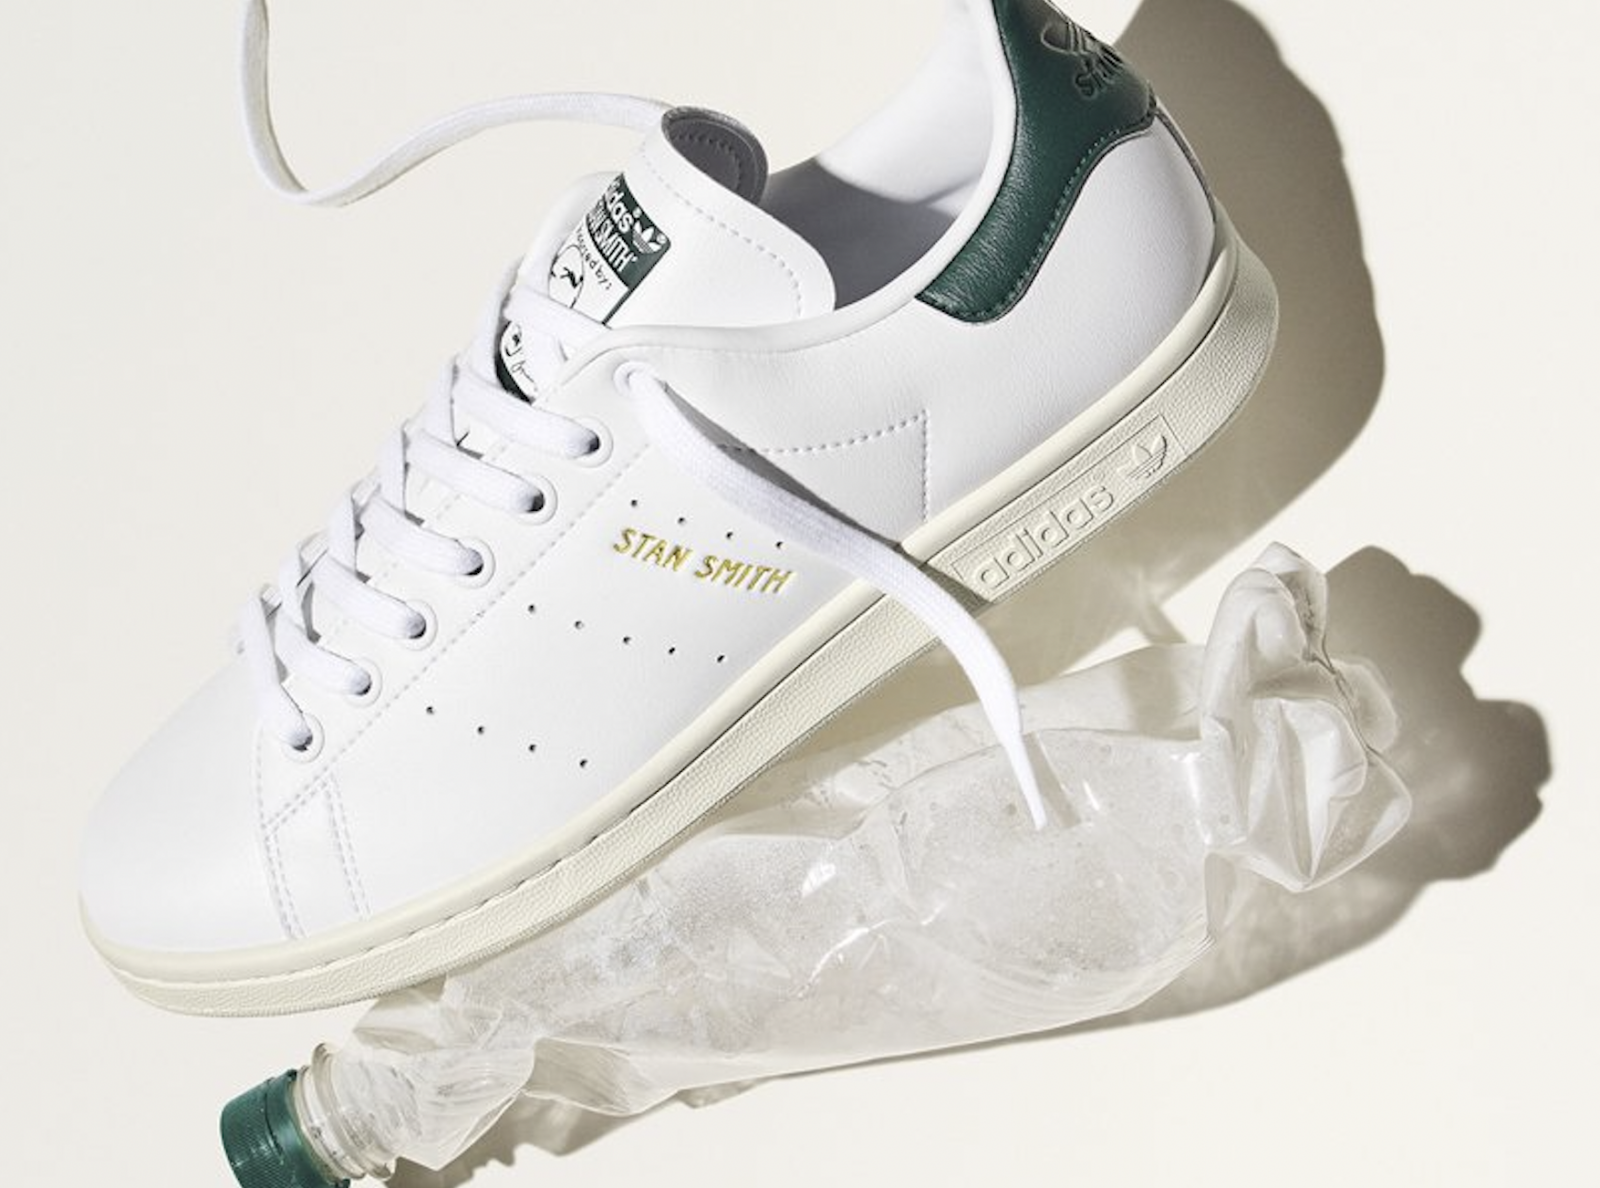 Apparently Custom Deloitte Stan Smith Adidas Sneakers Are a Thing - Going  Concern